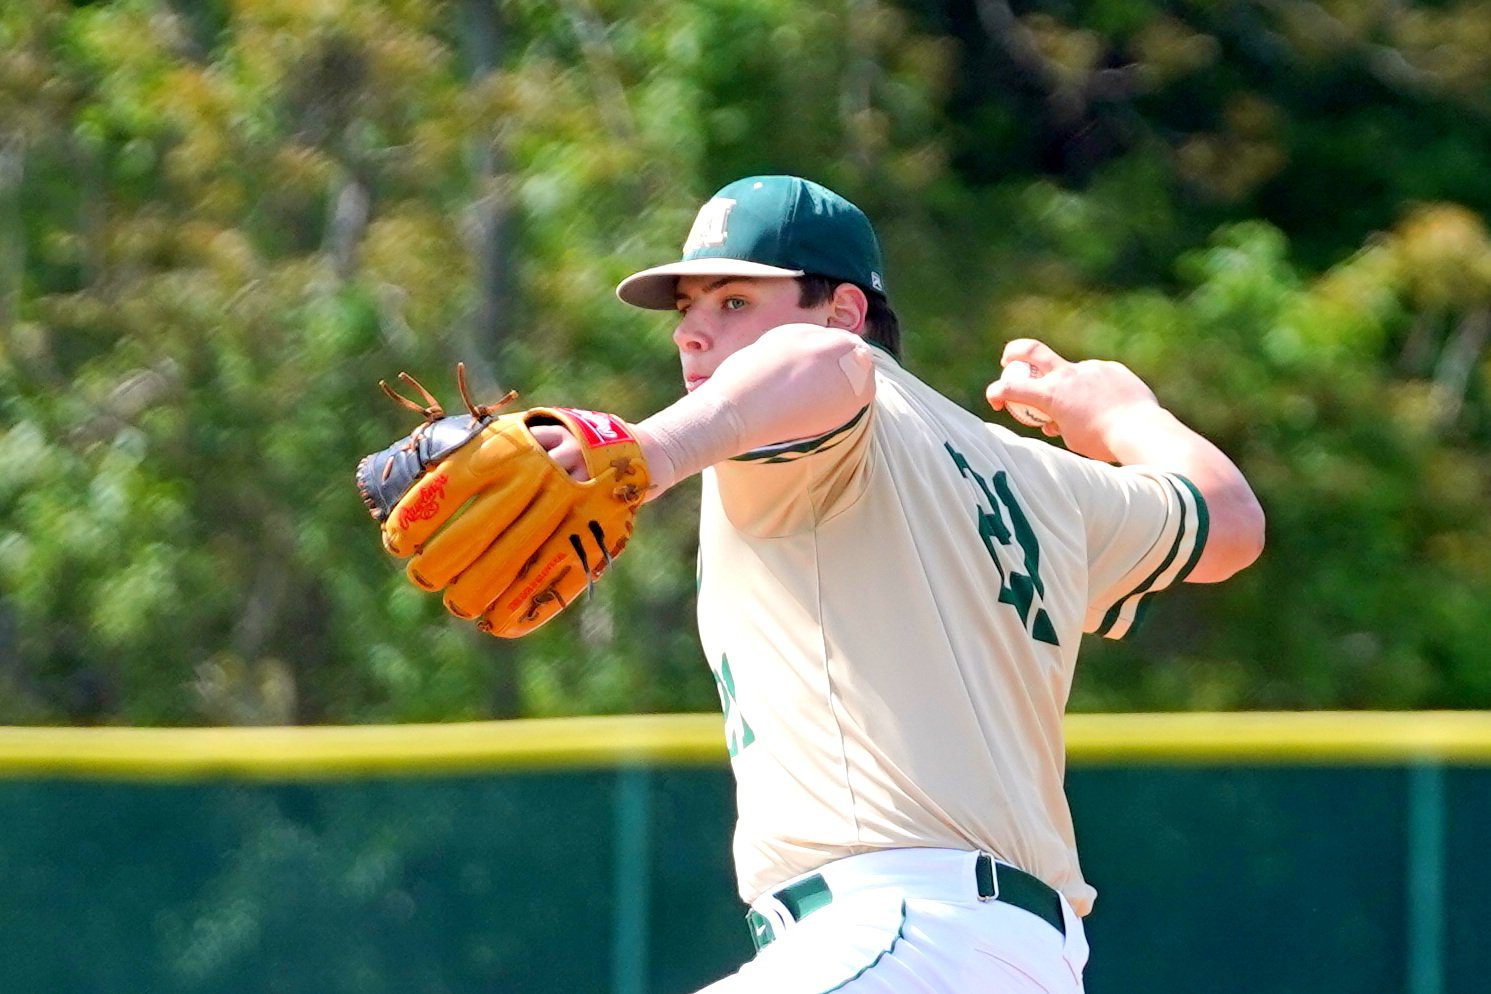 Modaff tosses a two-hitter as Muskegon Catholic Central shuts down Shelby 3-1